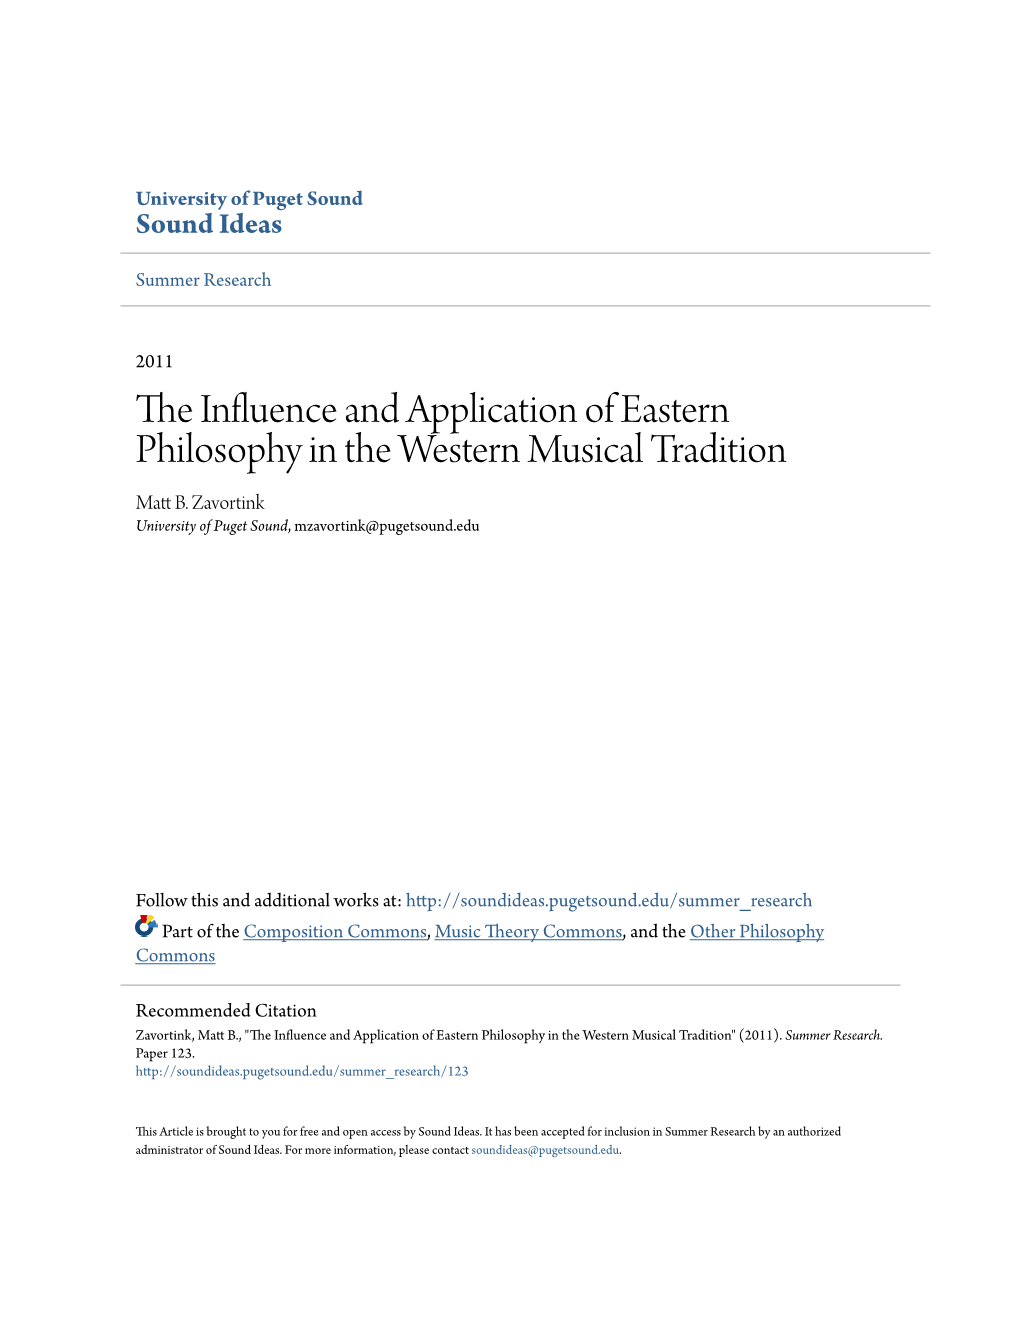 The Influence and Application of Eastern Philosophy in the Western Musical Tradition